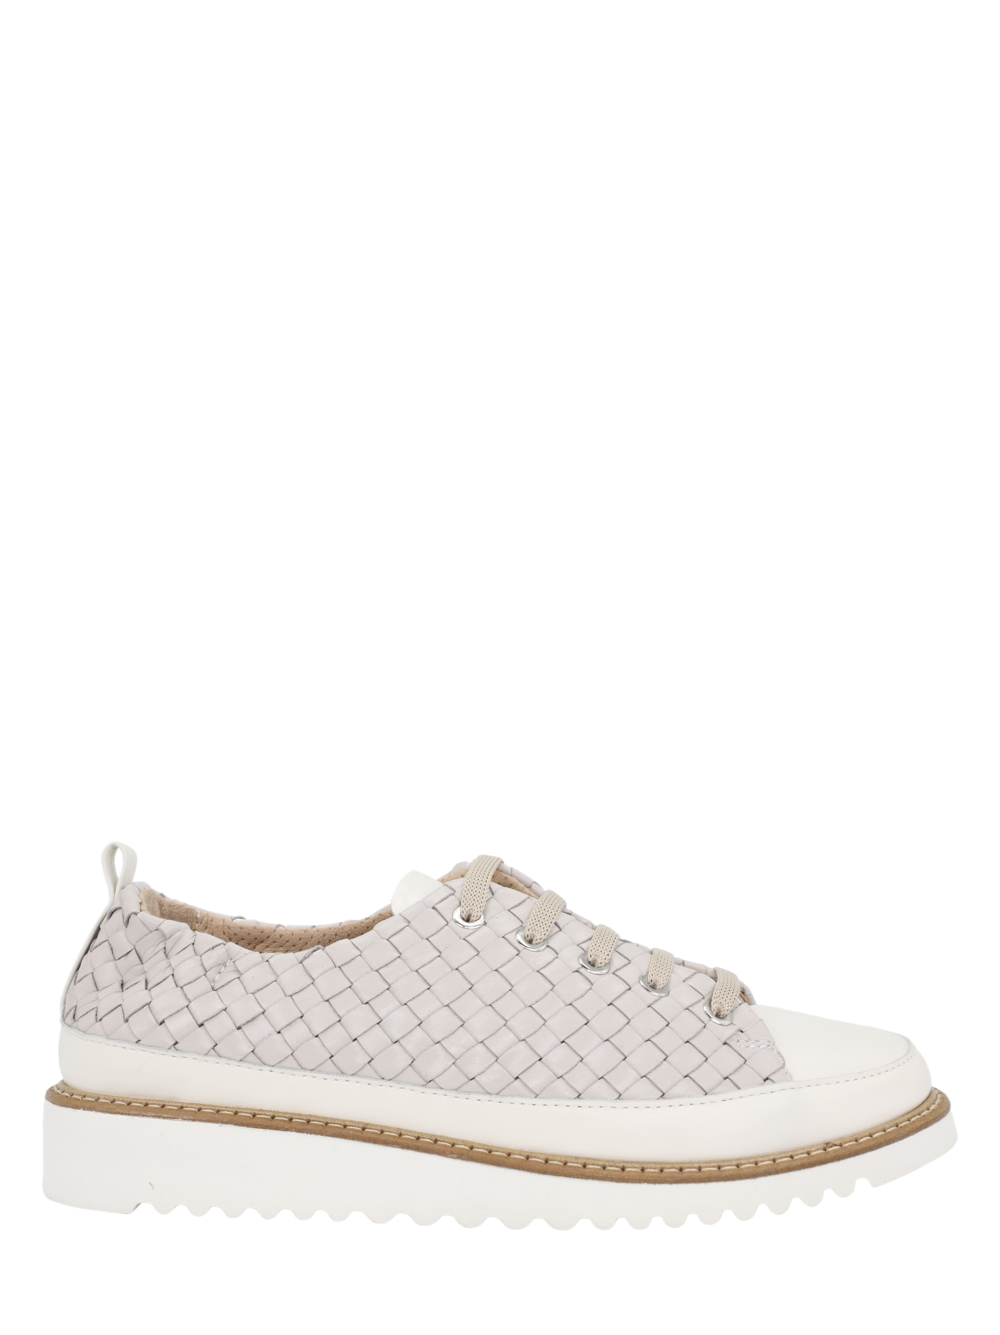 Ron White Norelle Oyster Bootie Sneaker